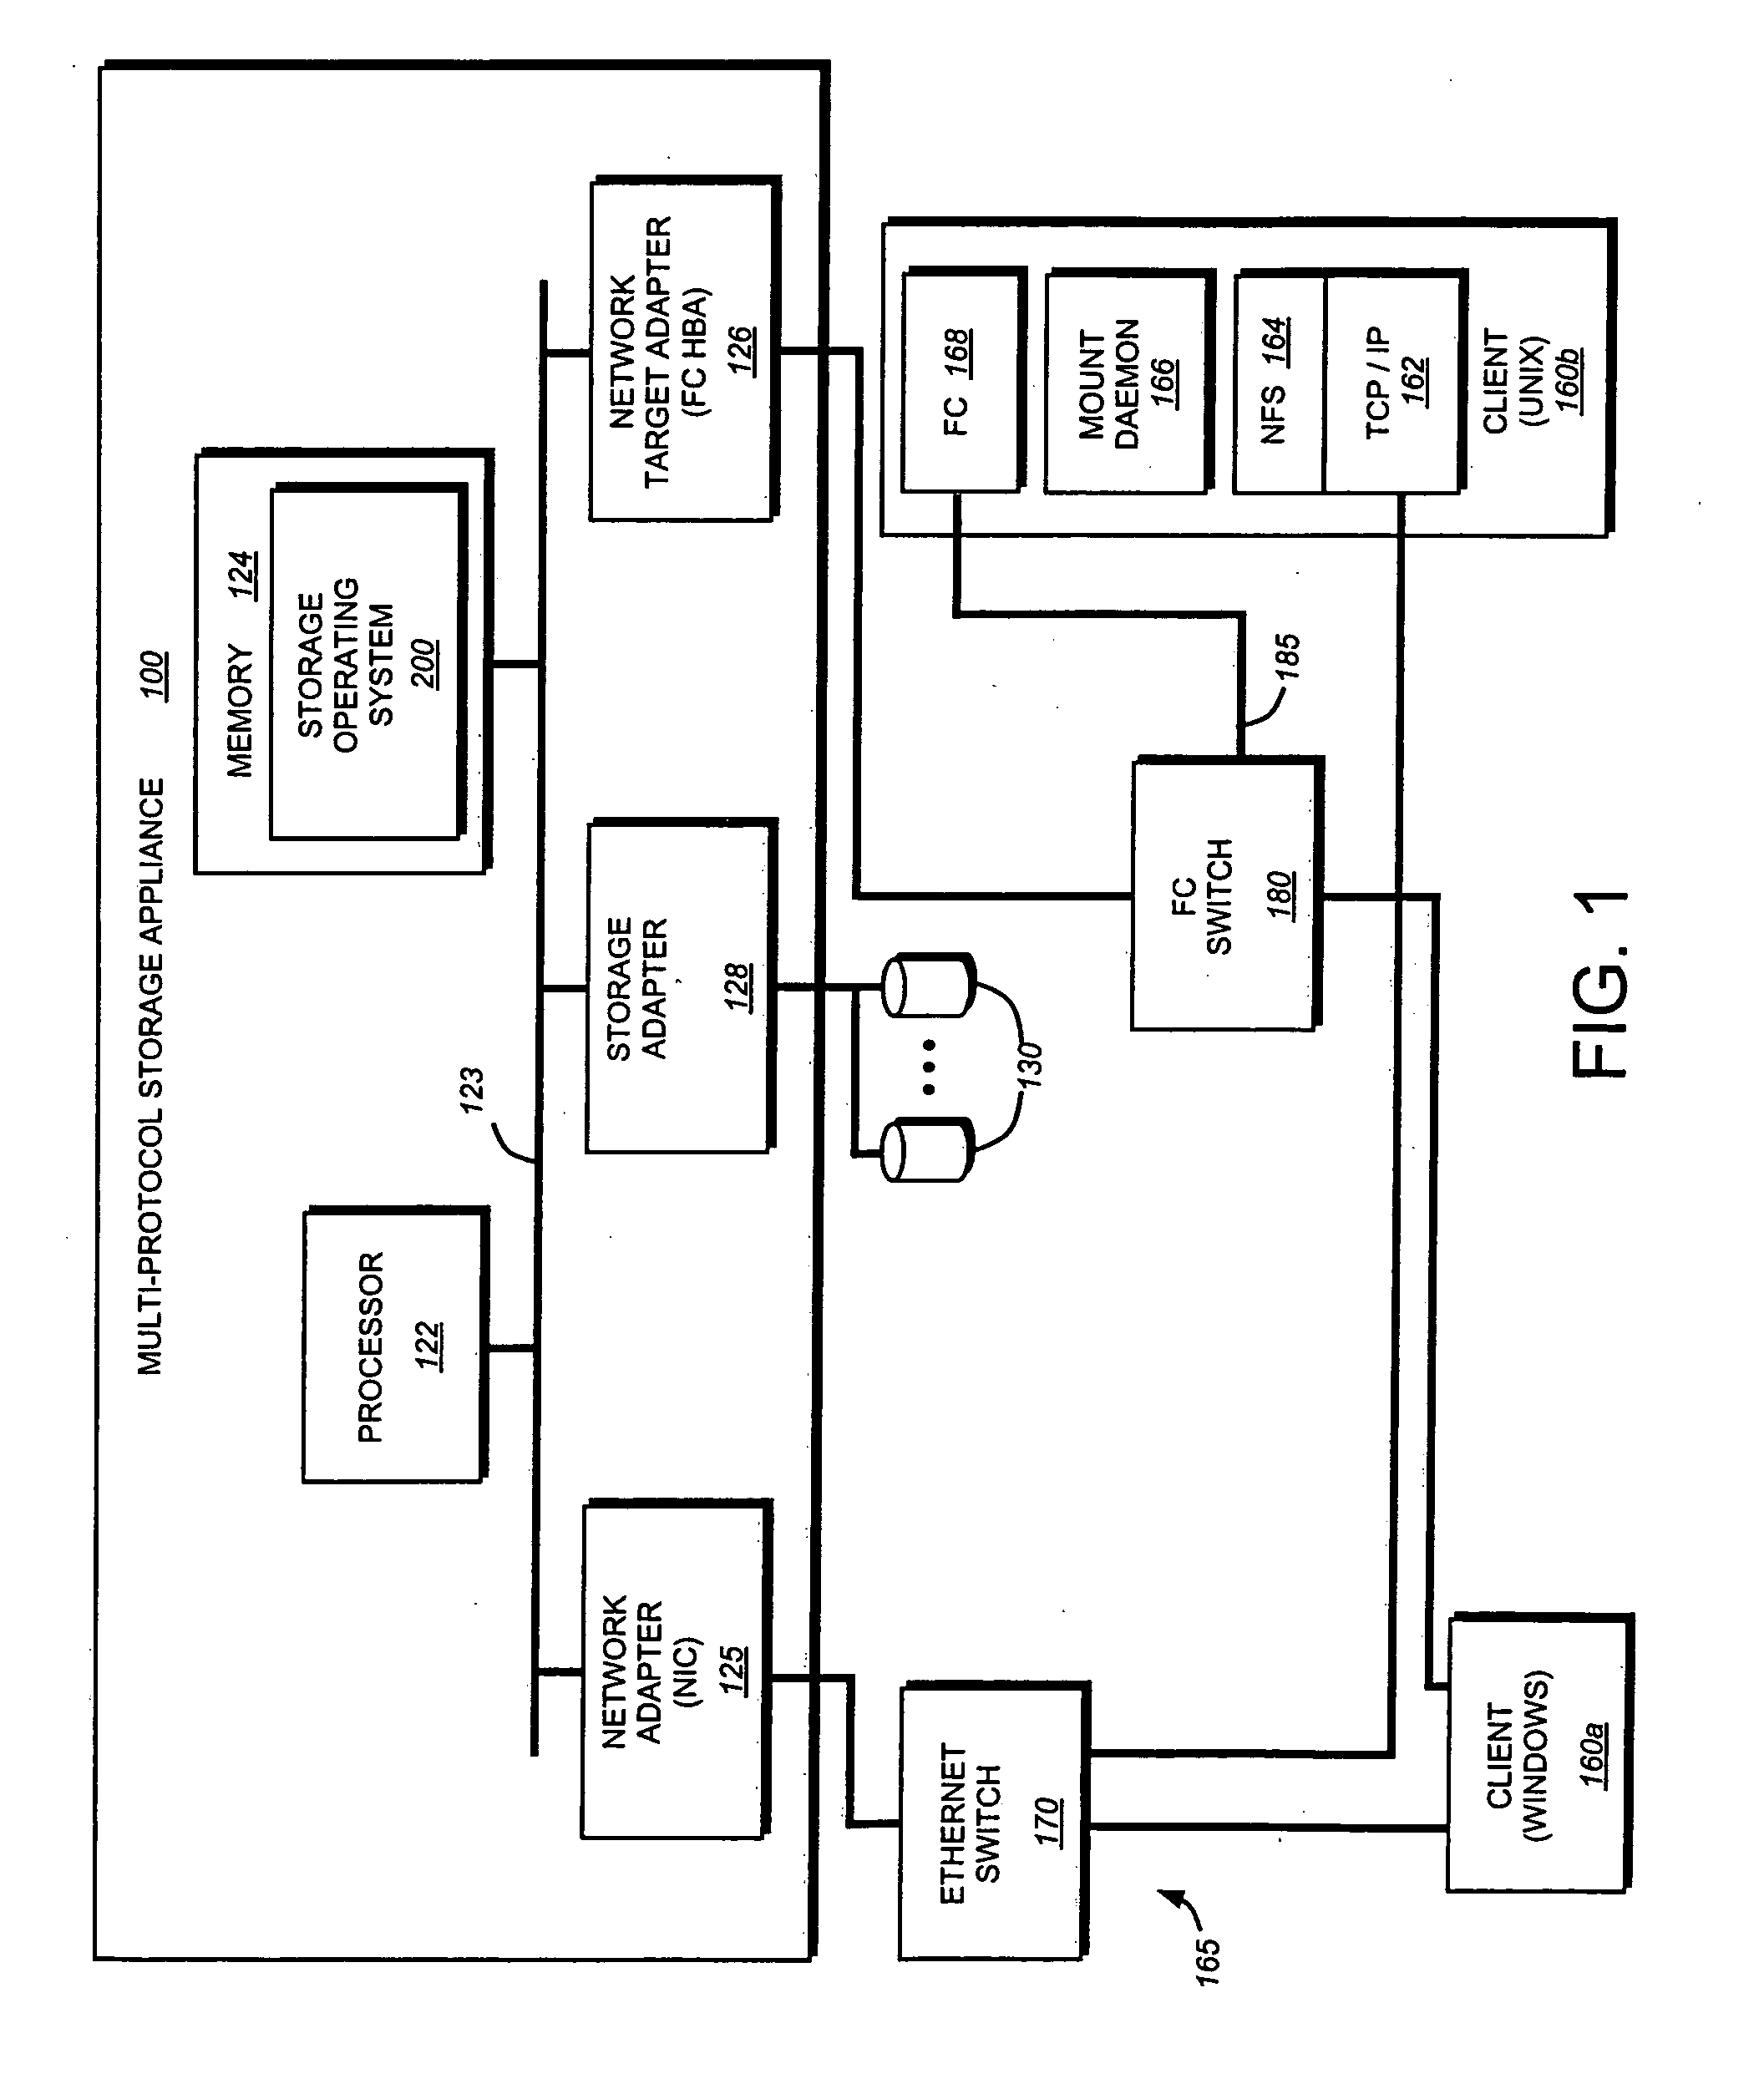 System and method for transparently accessing a virtual disk using a file-based protocol